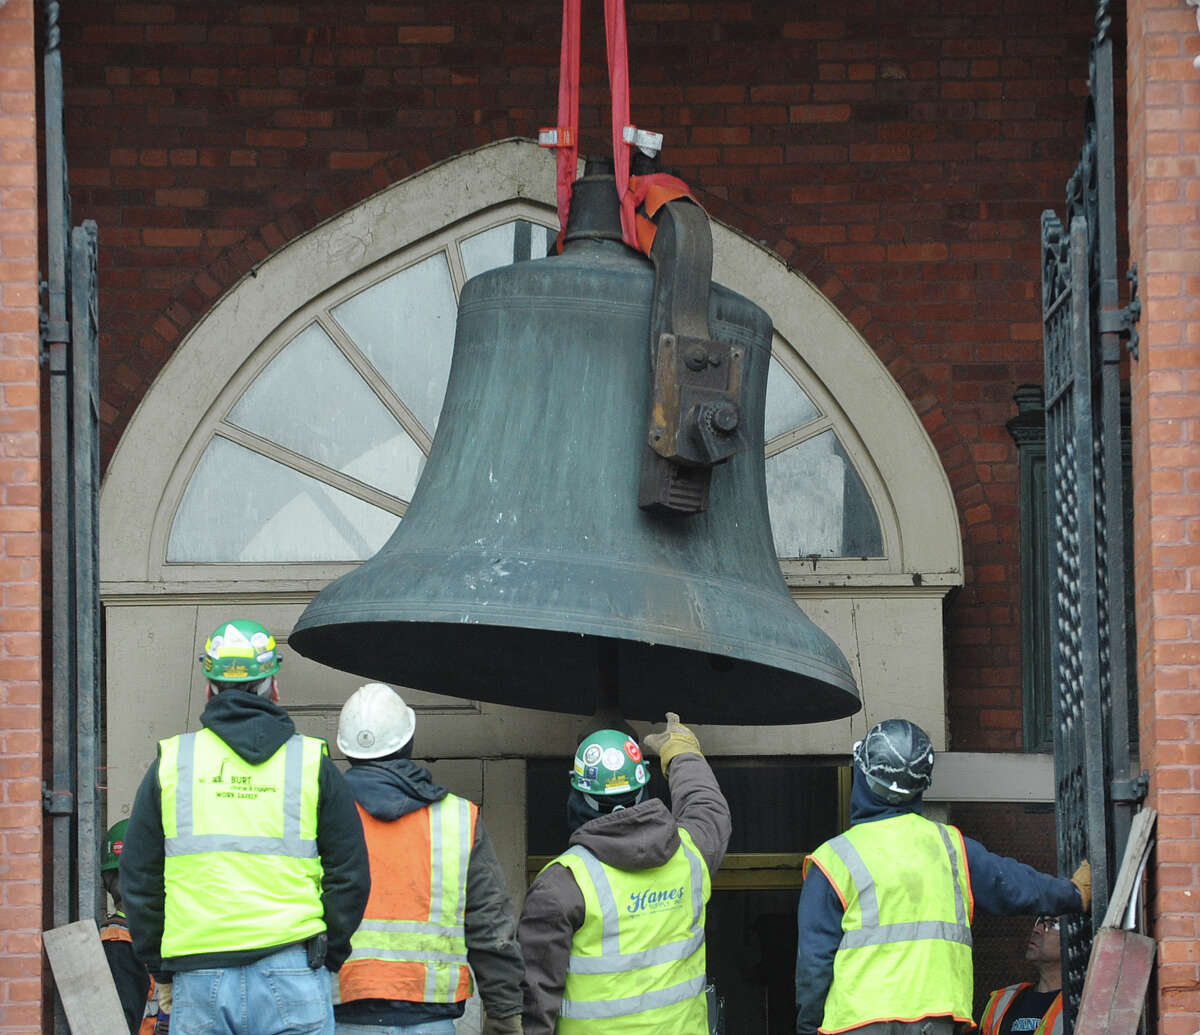 A large bell is lowered by a crane as workers removed the bell from the tower of the former St. Patrick's Church building on Tuesday, Feb. 19, 2013, in Watervliet, NY. (Paul Buckowski / Times Union)